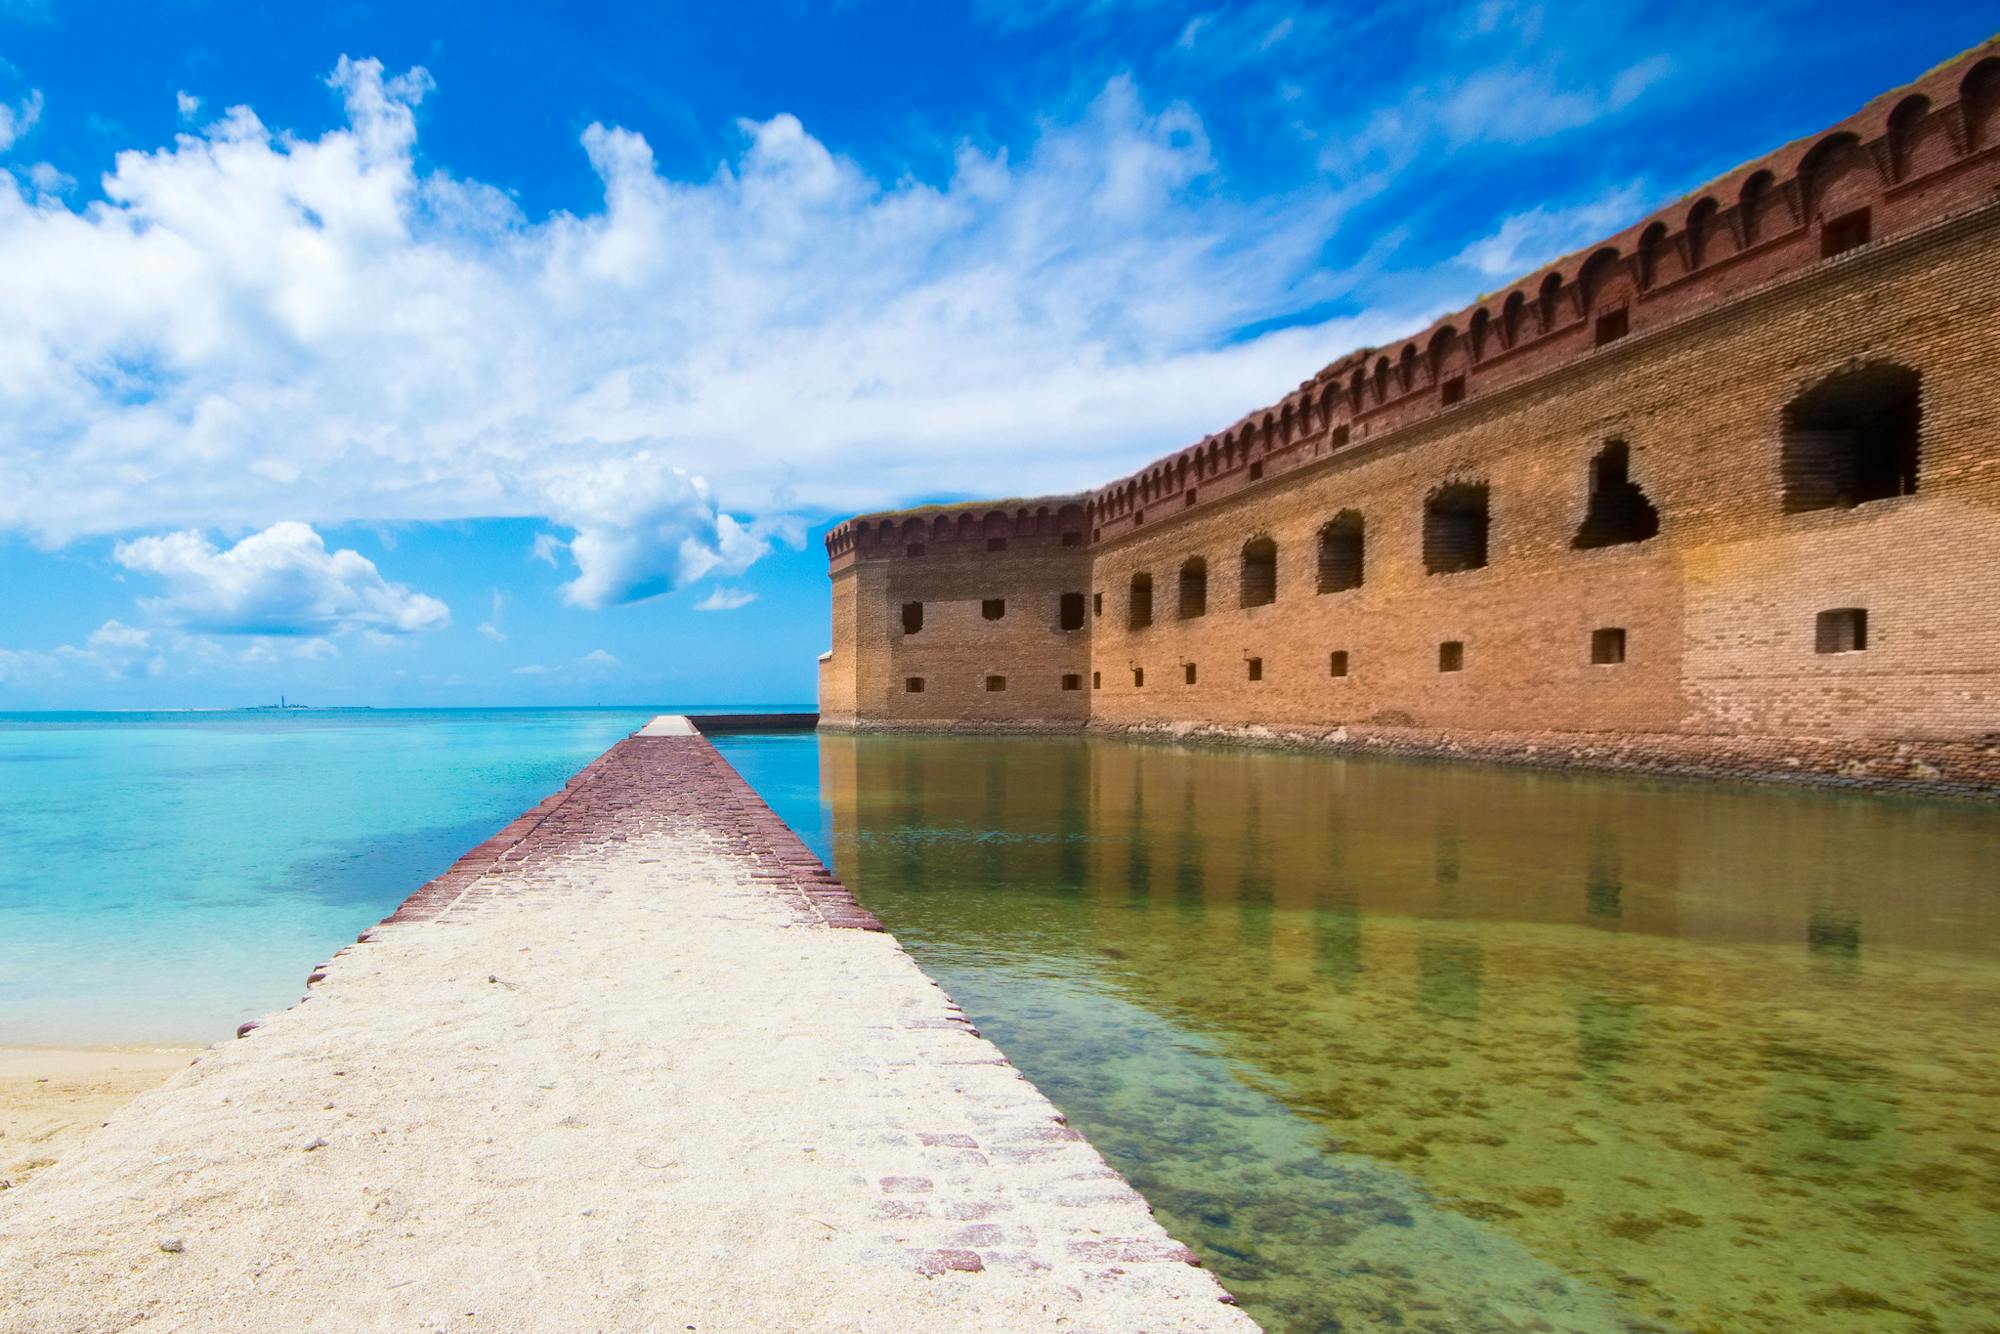 On the moat wall outside Fort Jefferson